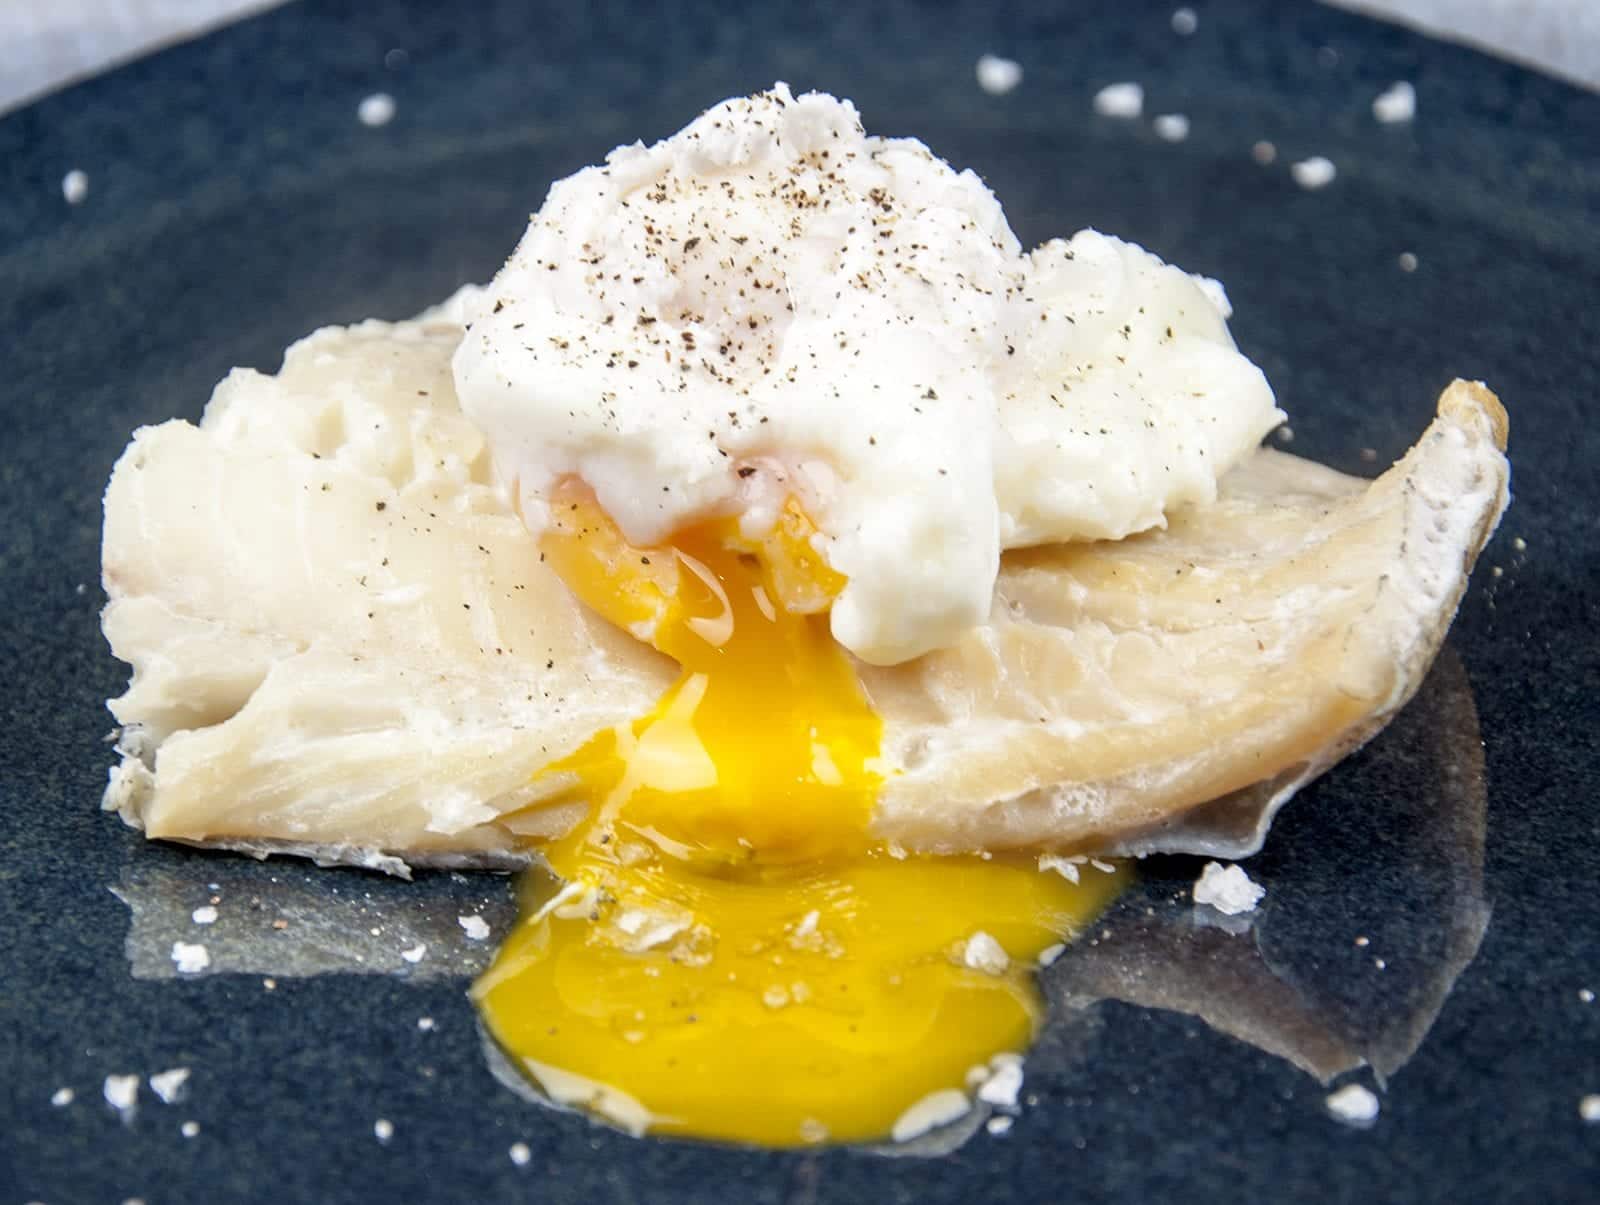 How to make this wonderful healthy breakfast of smoked haddock and poached eggs. Hardly any fat or carbs! A very healthy Yum!! | https://theyumyumclub.com